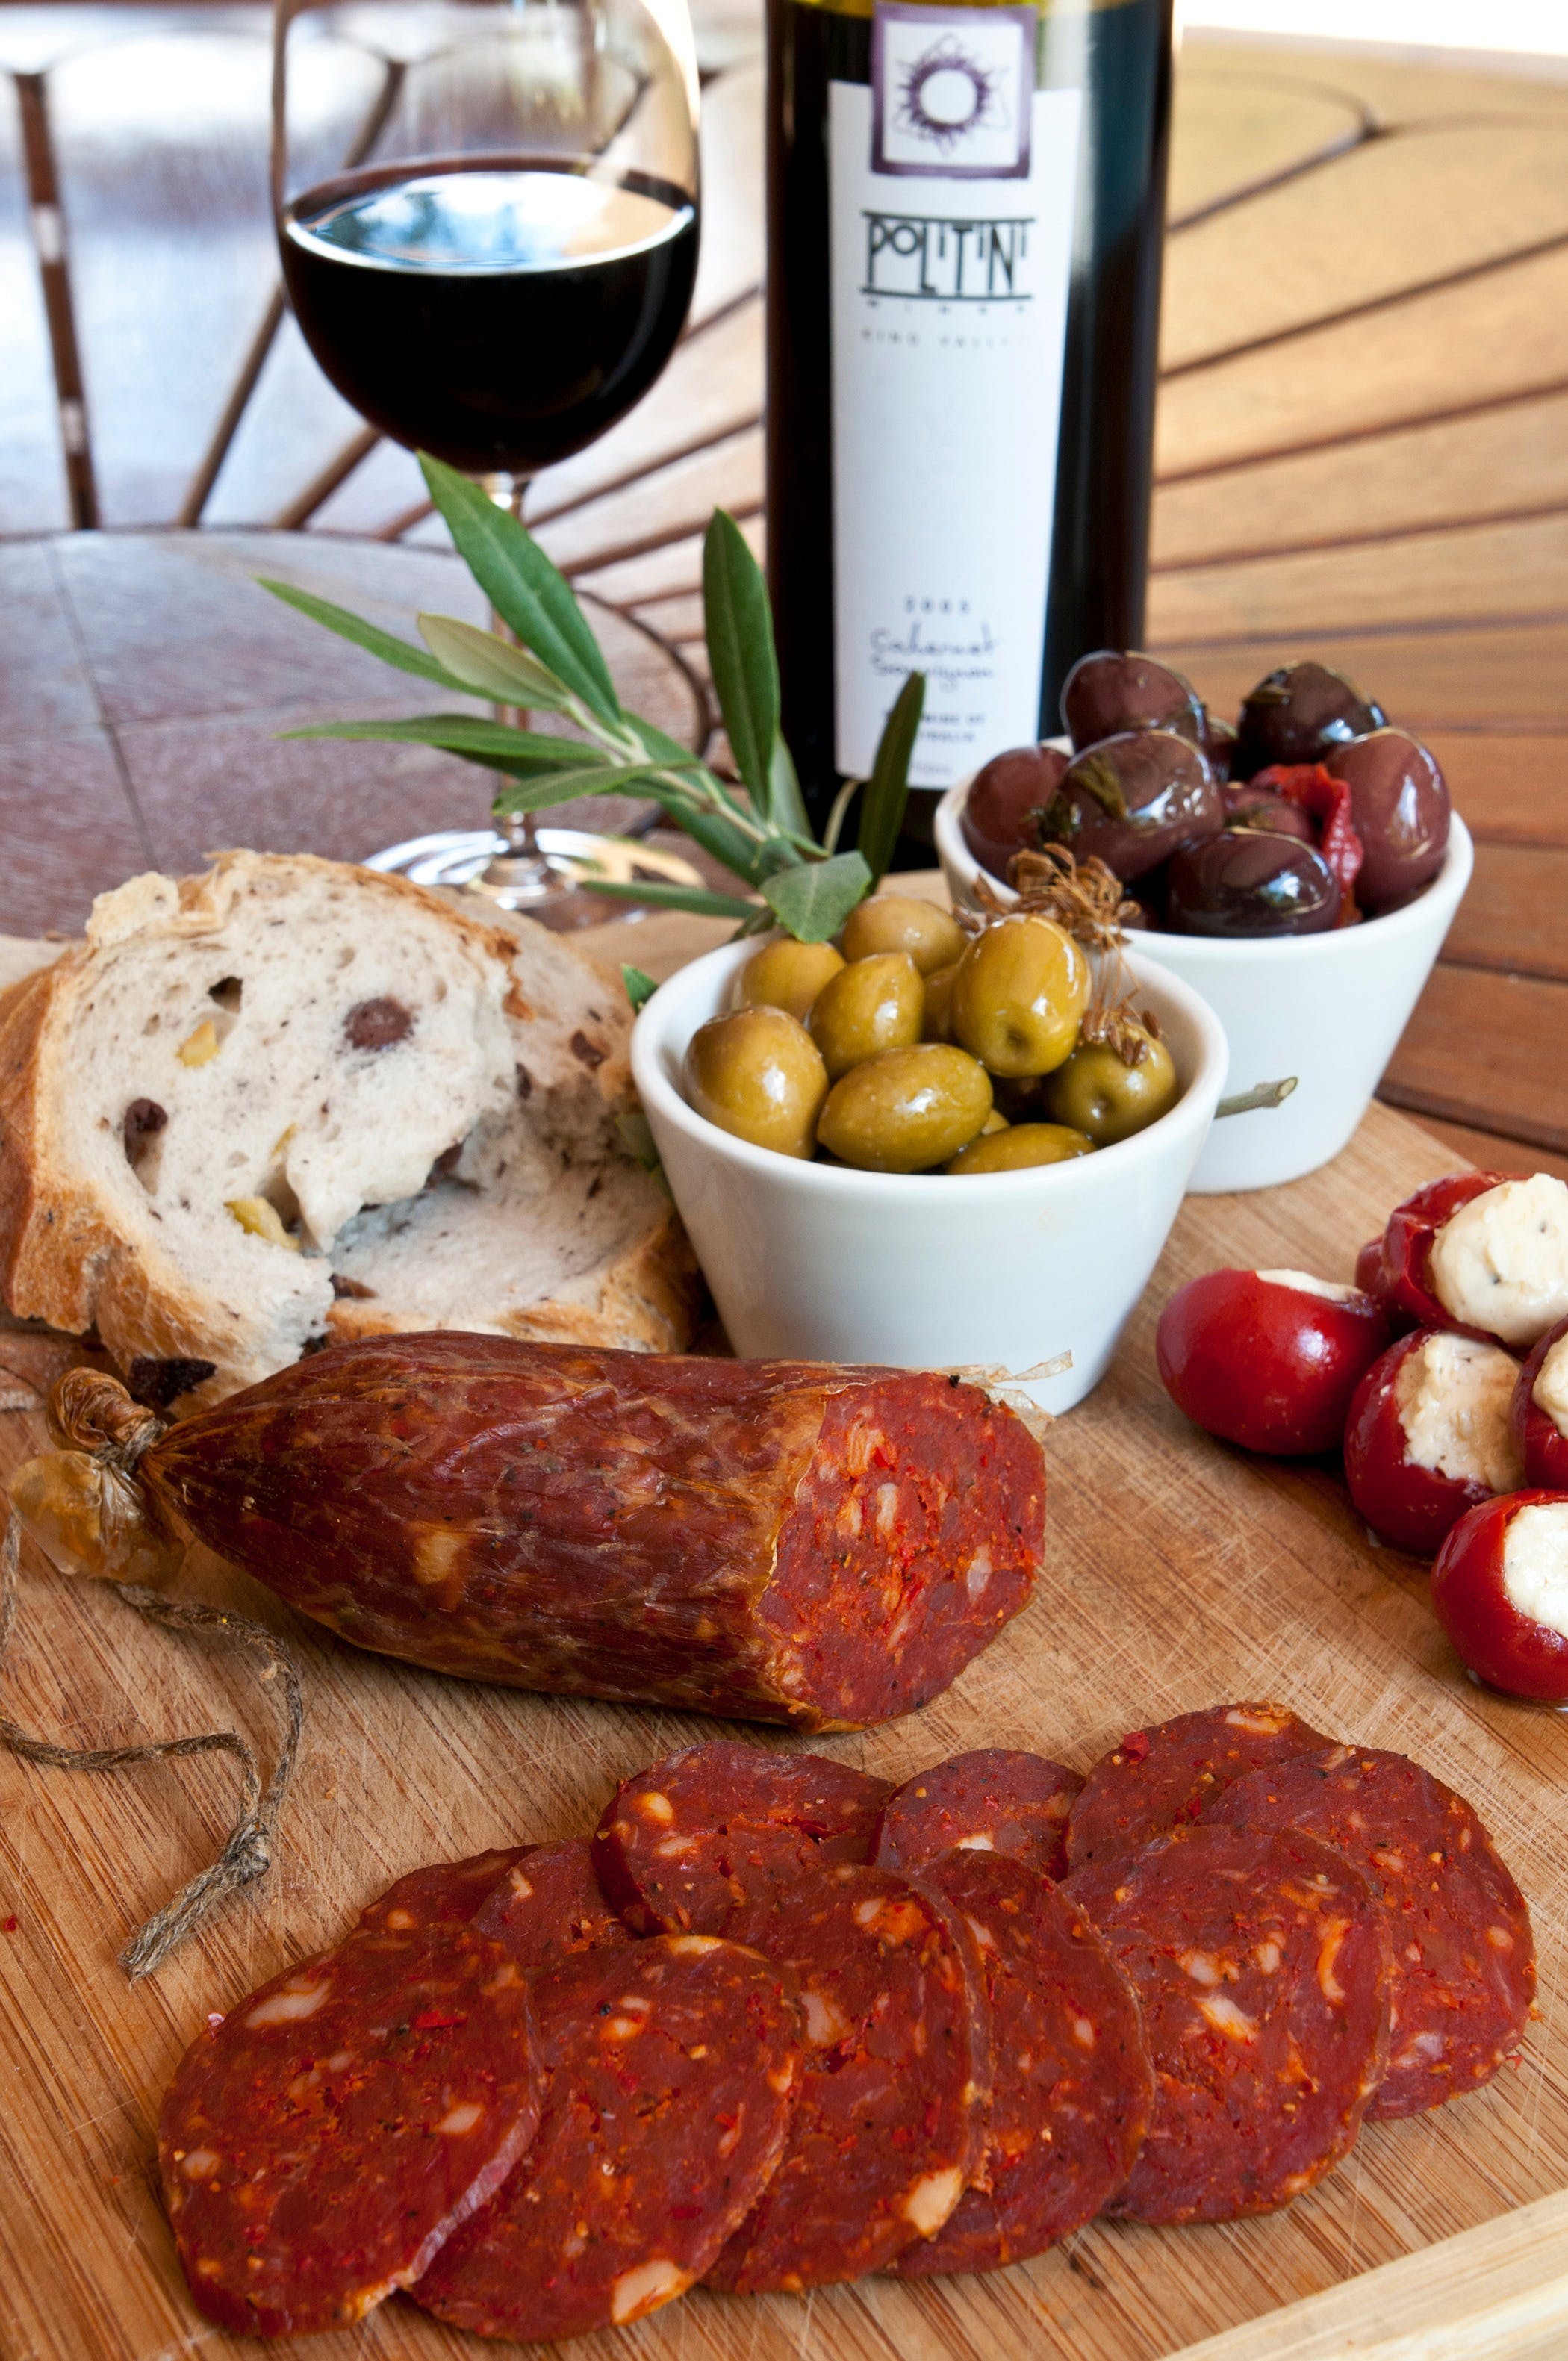 Salami and Salsicce Making classes at Politini Wines - Tourism Canberra